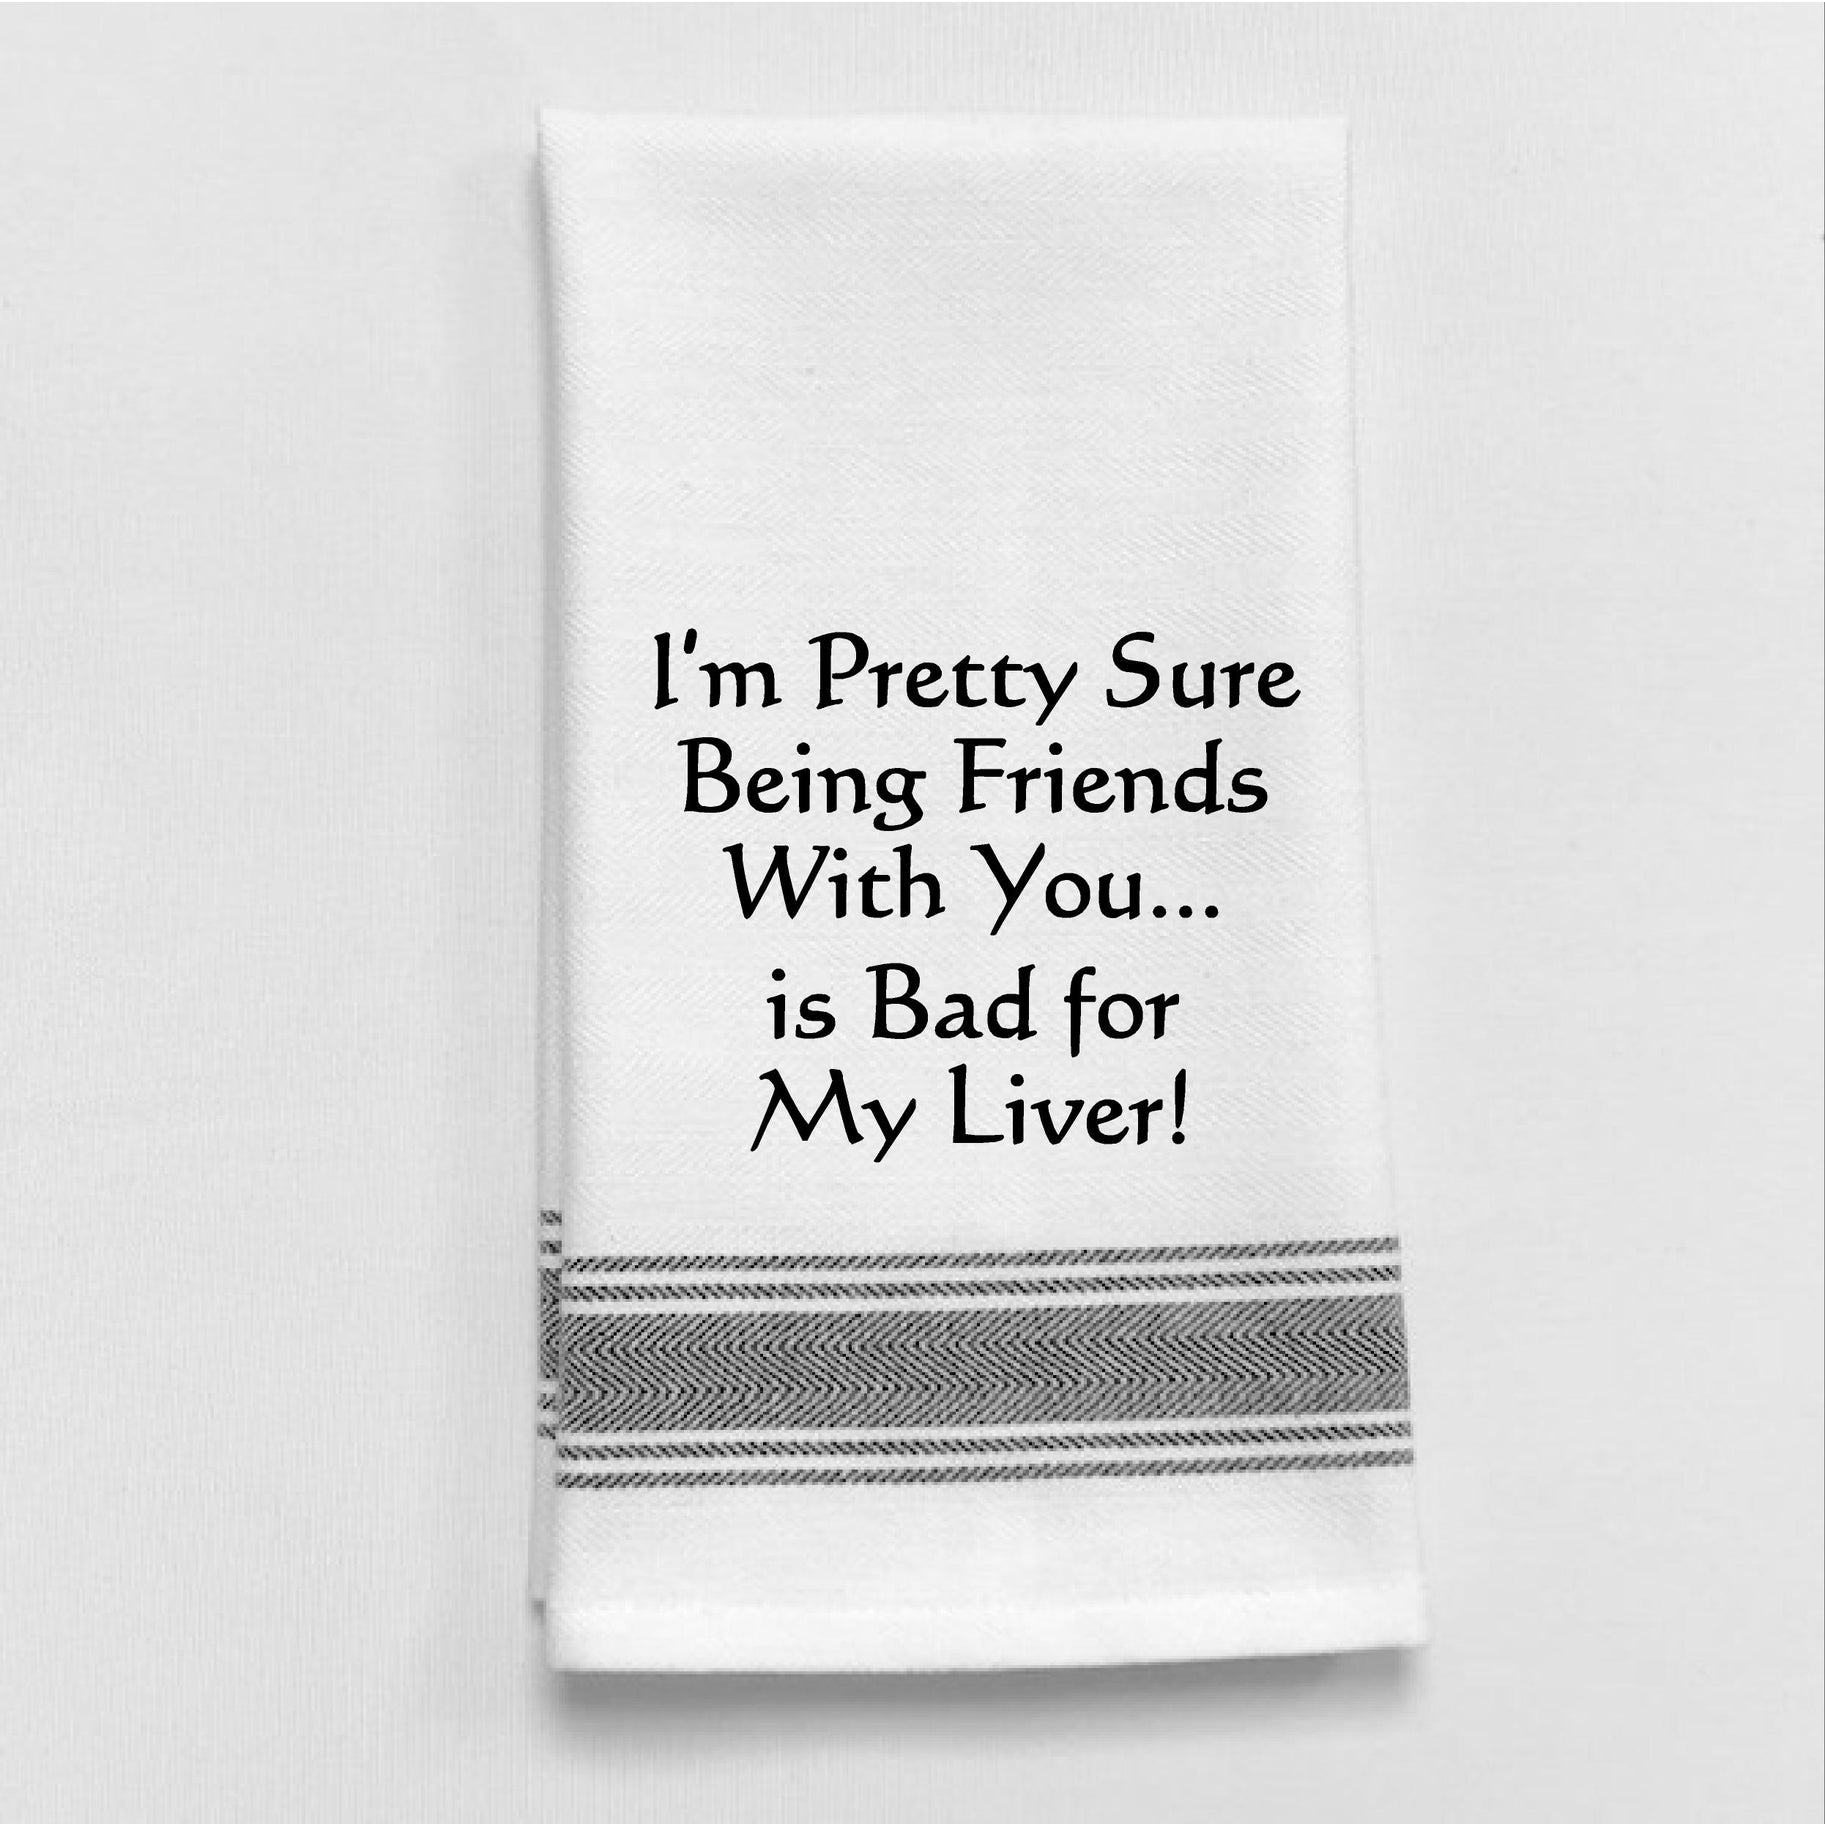 Being Friends With You - Towel